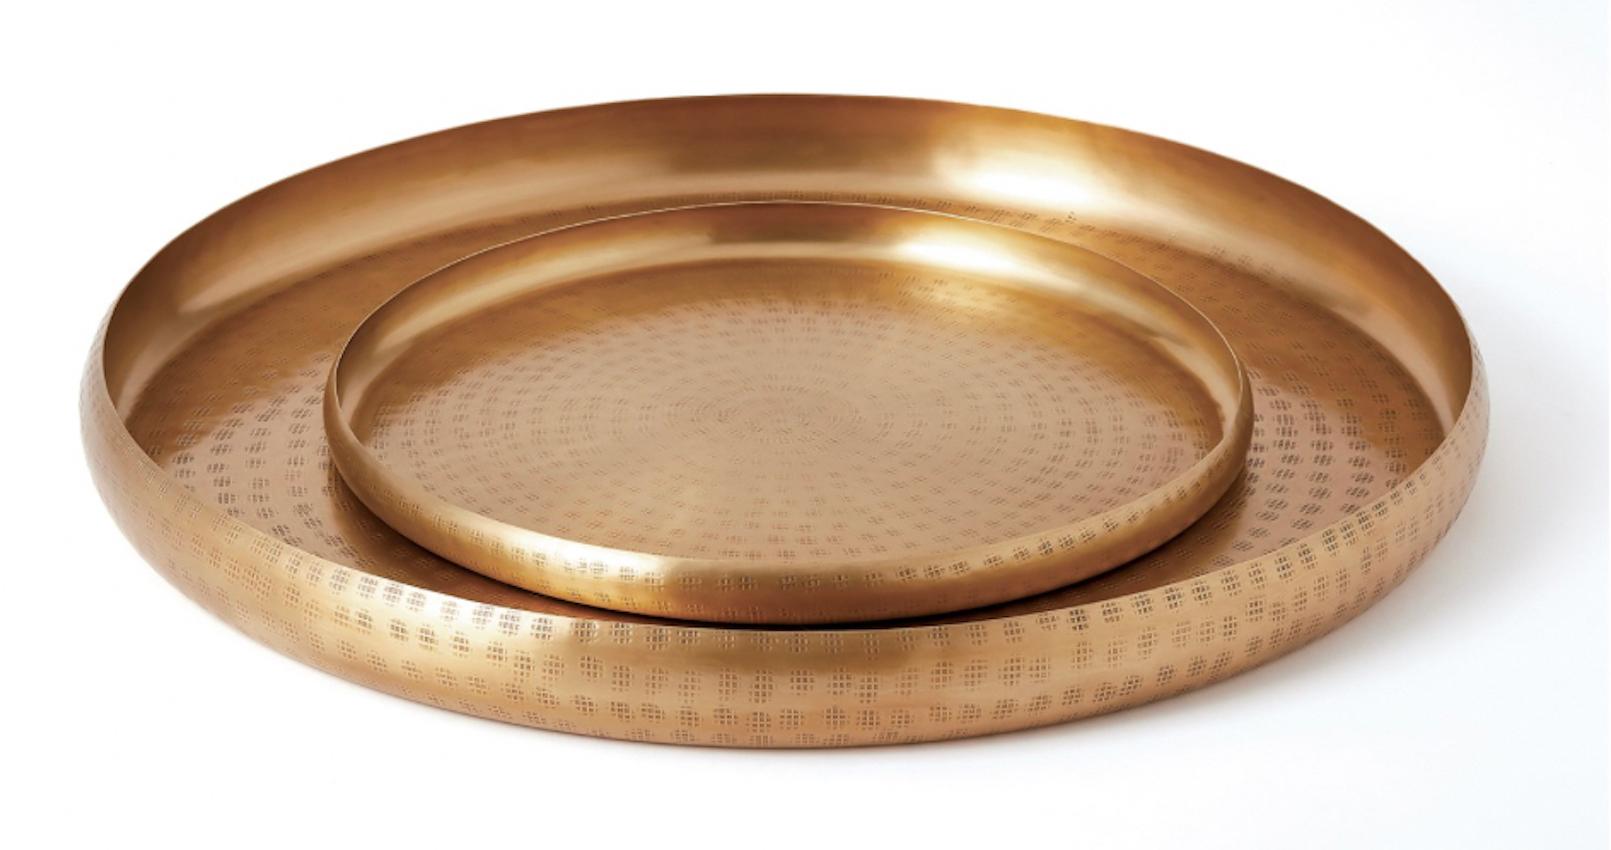 Hand-embossed brass offering trays 
Traditionally used for serving or as offering trays in religious ceremonies
Sourced by Martyn Lawrence Bullard
